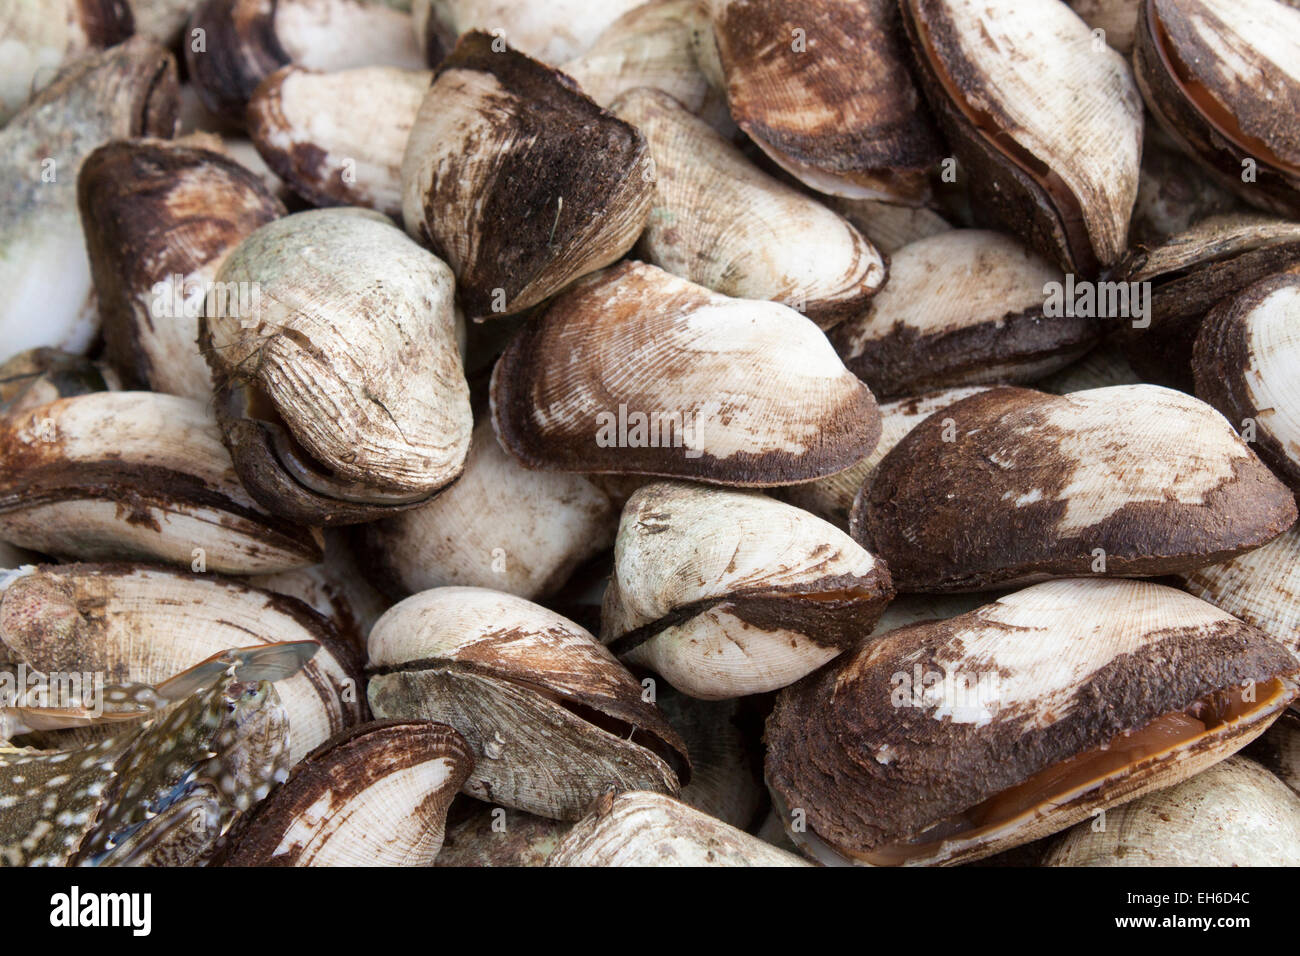 A lot of fresh clams, at a market in Phu quoc, Vietnam Stock Photo